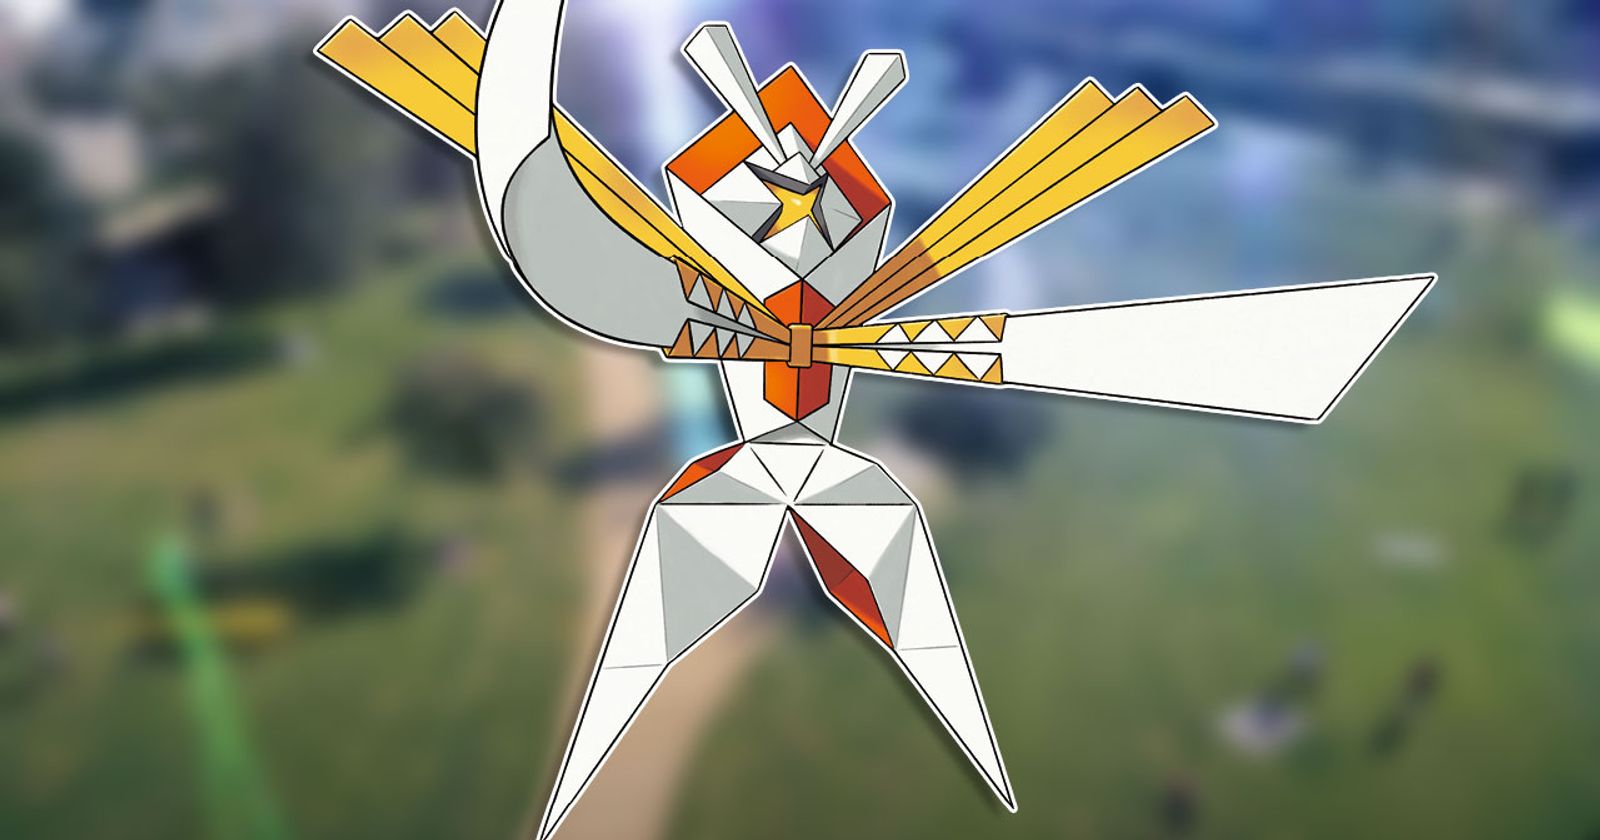 Is Kartana Really That Good in 'Pokémon GO'? All the Details